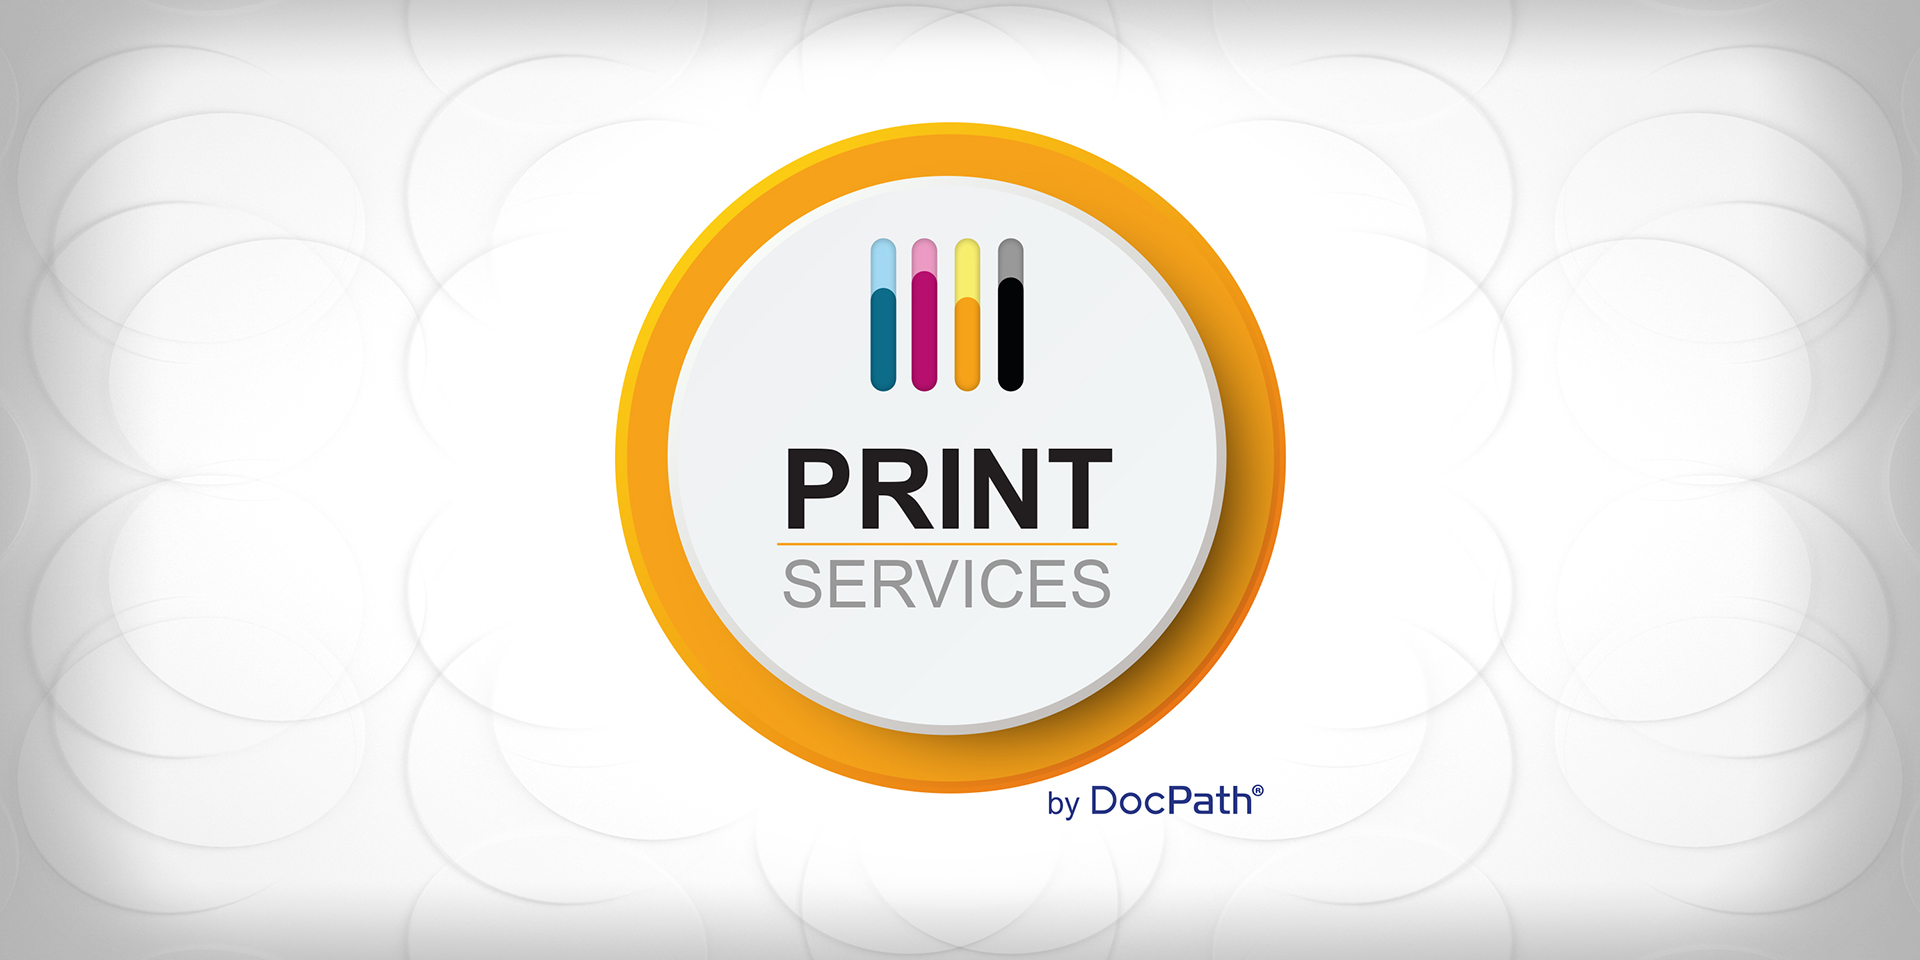 Optimizing the management of printing environments in a simple, fast and efficient way an advanced print output management platform